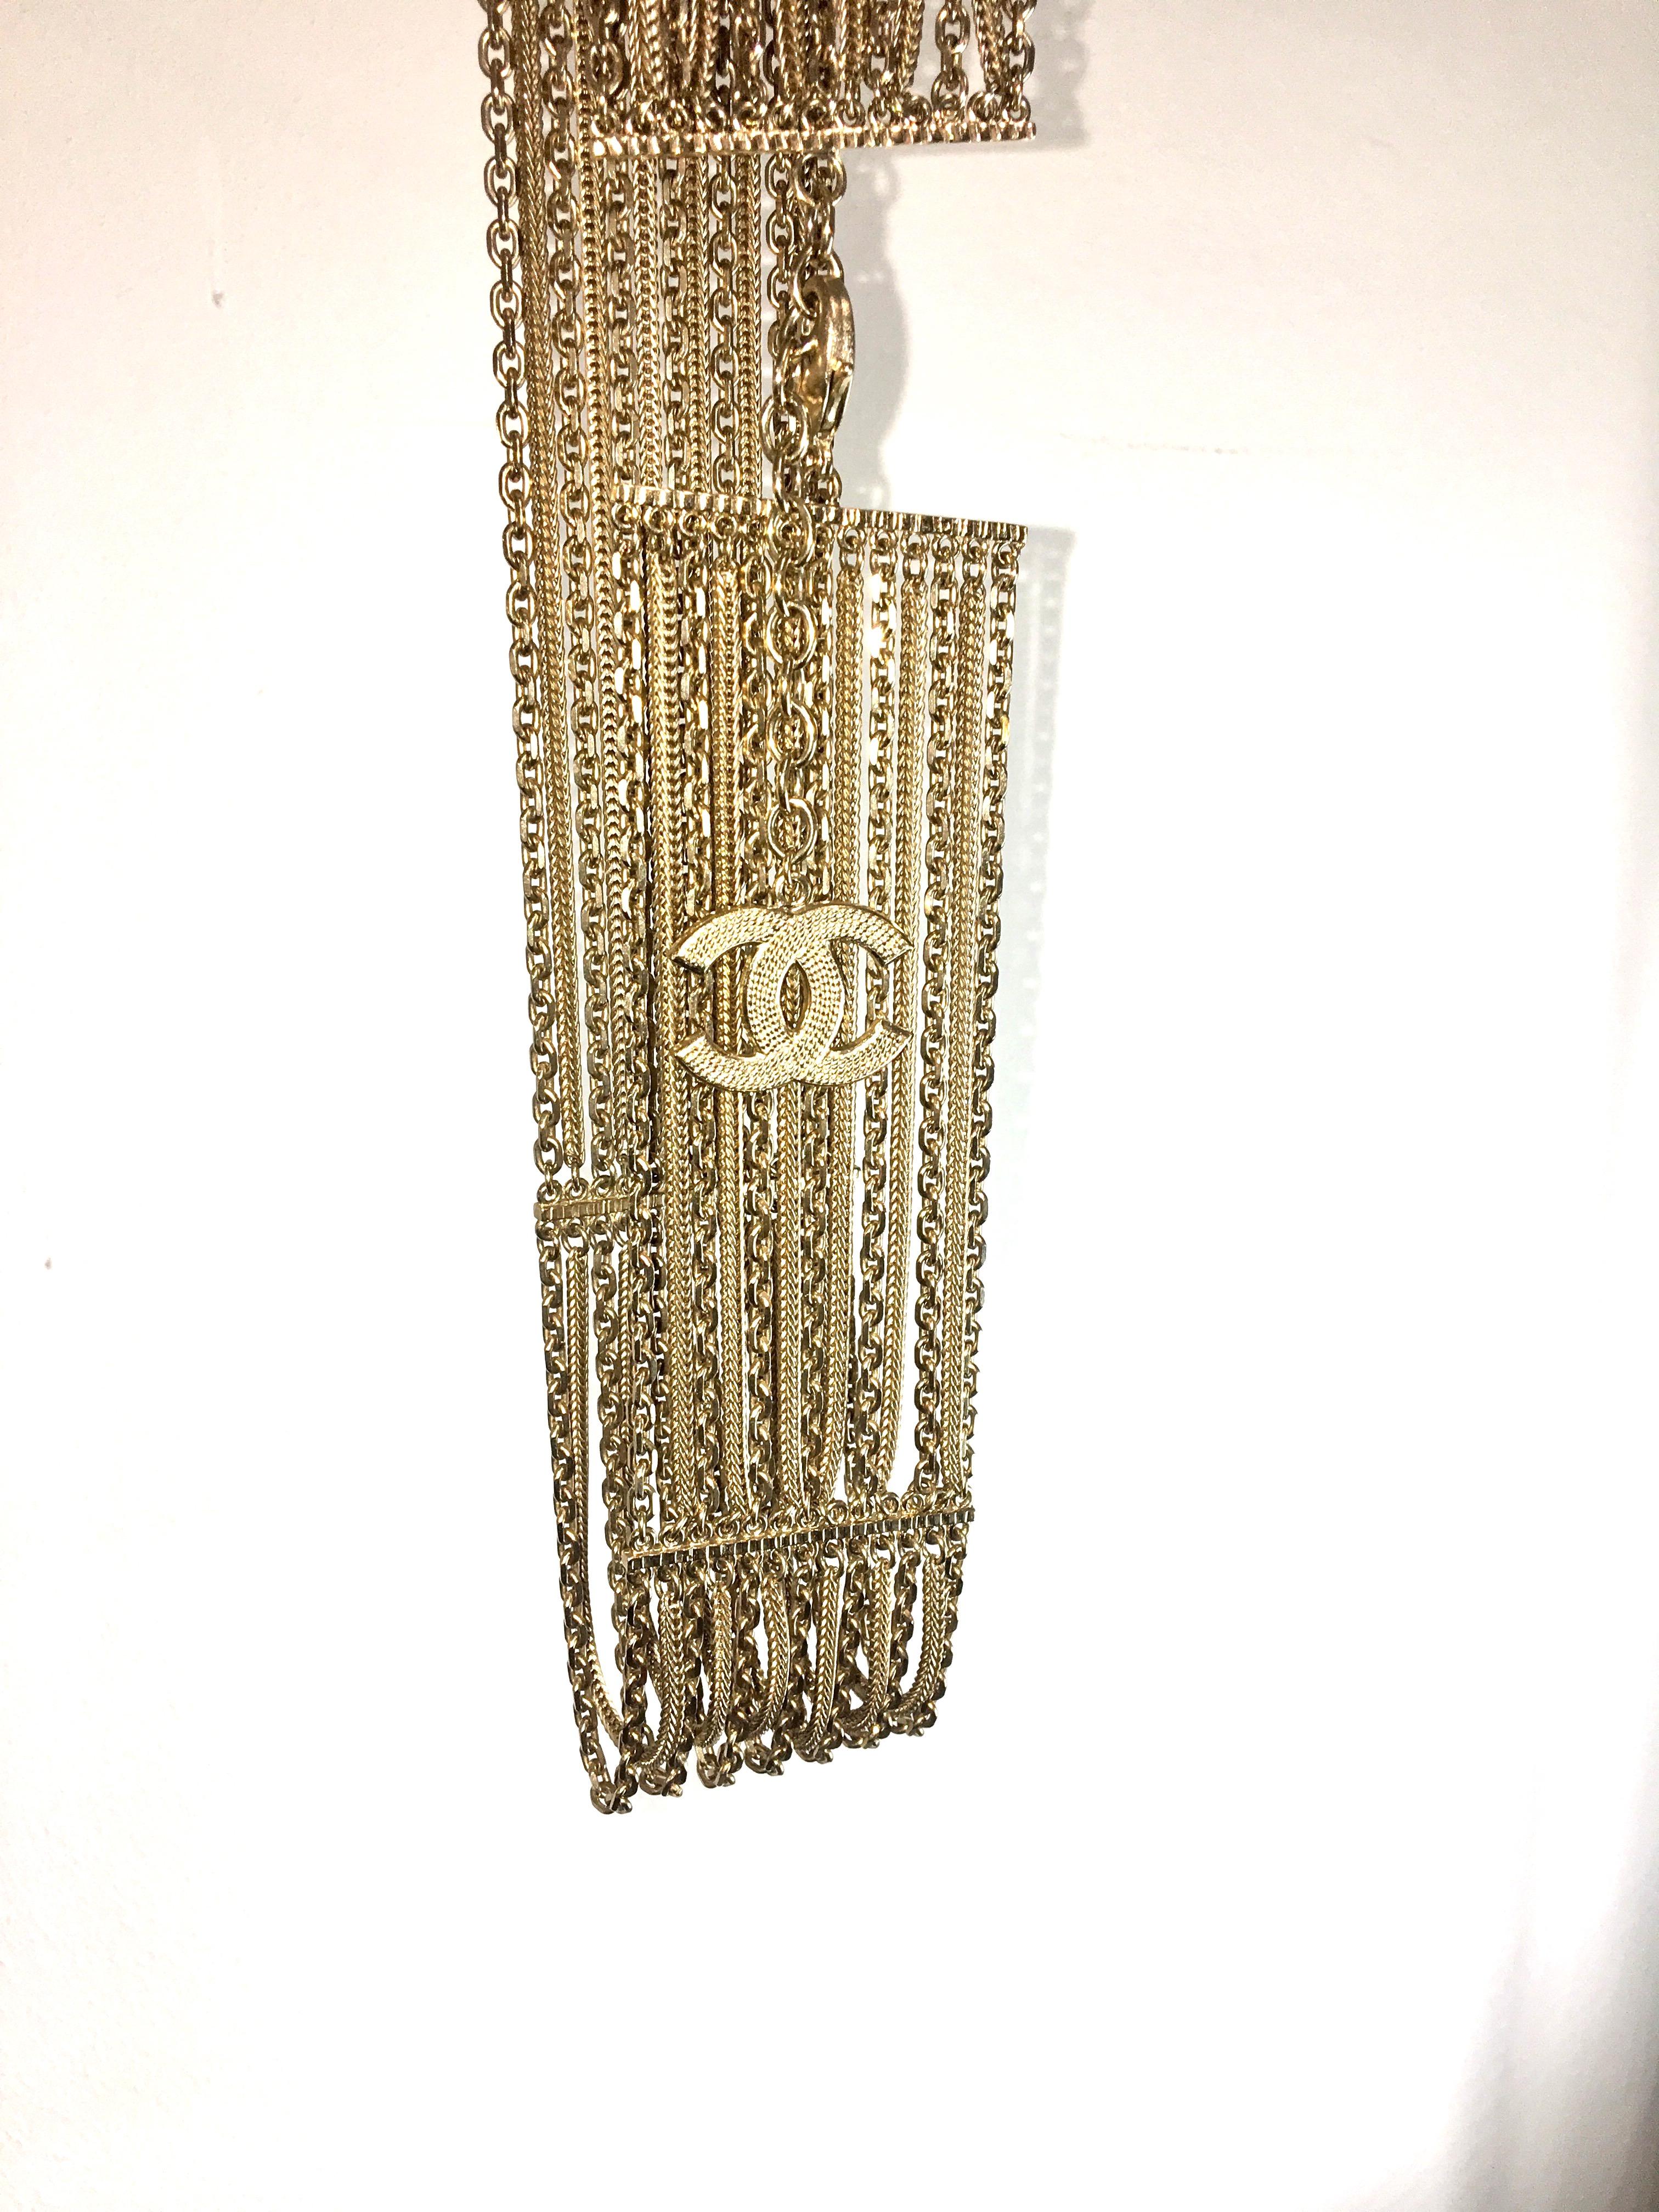 Have a very touch of glam with this Chanel multi chain gold belt.
Measure 76 cm.
19 metal chains.